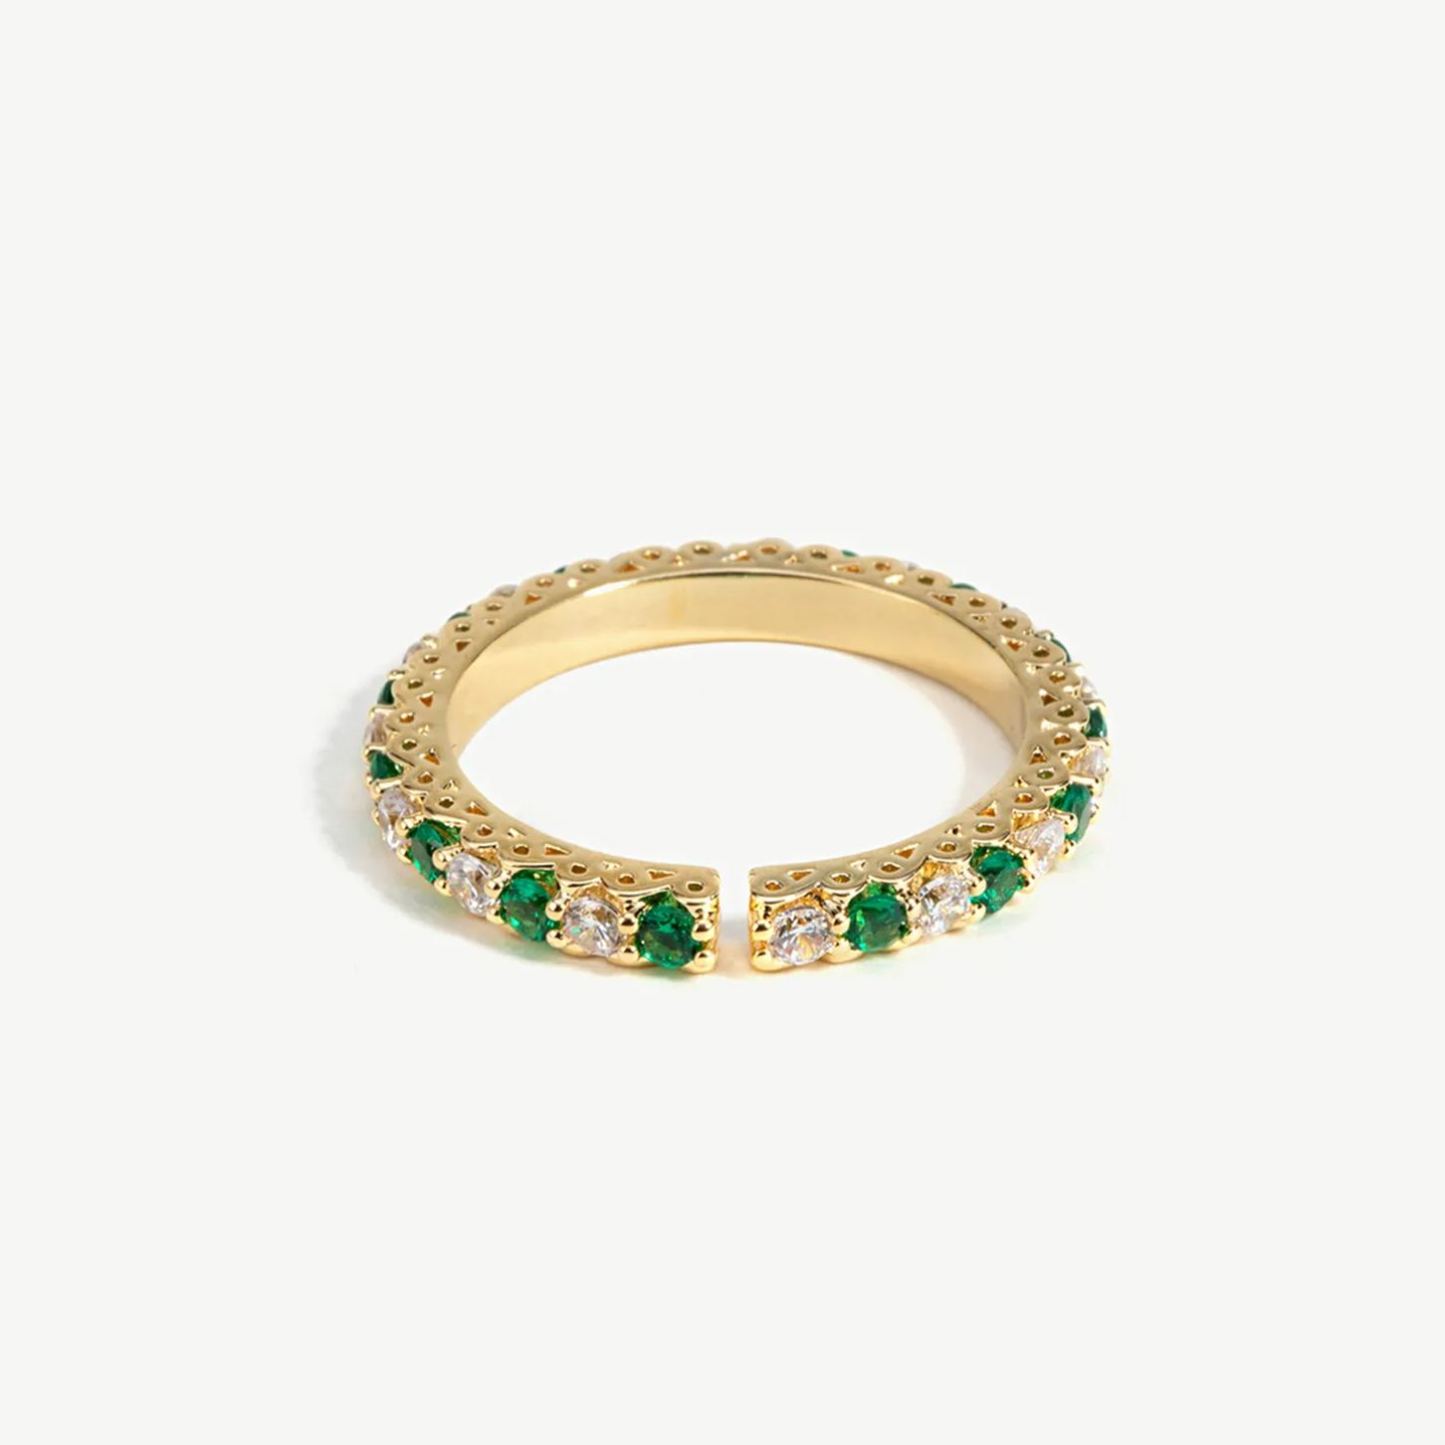 Green Elf Pave Ring